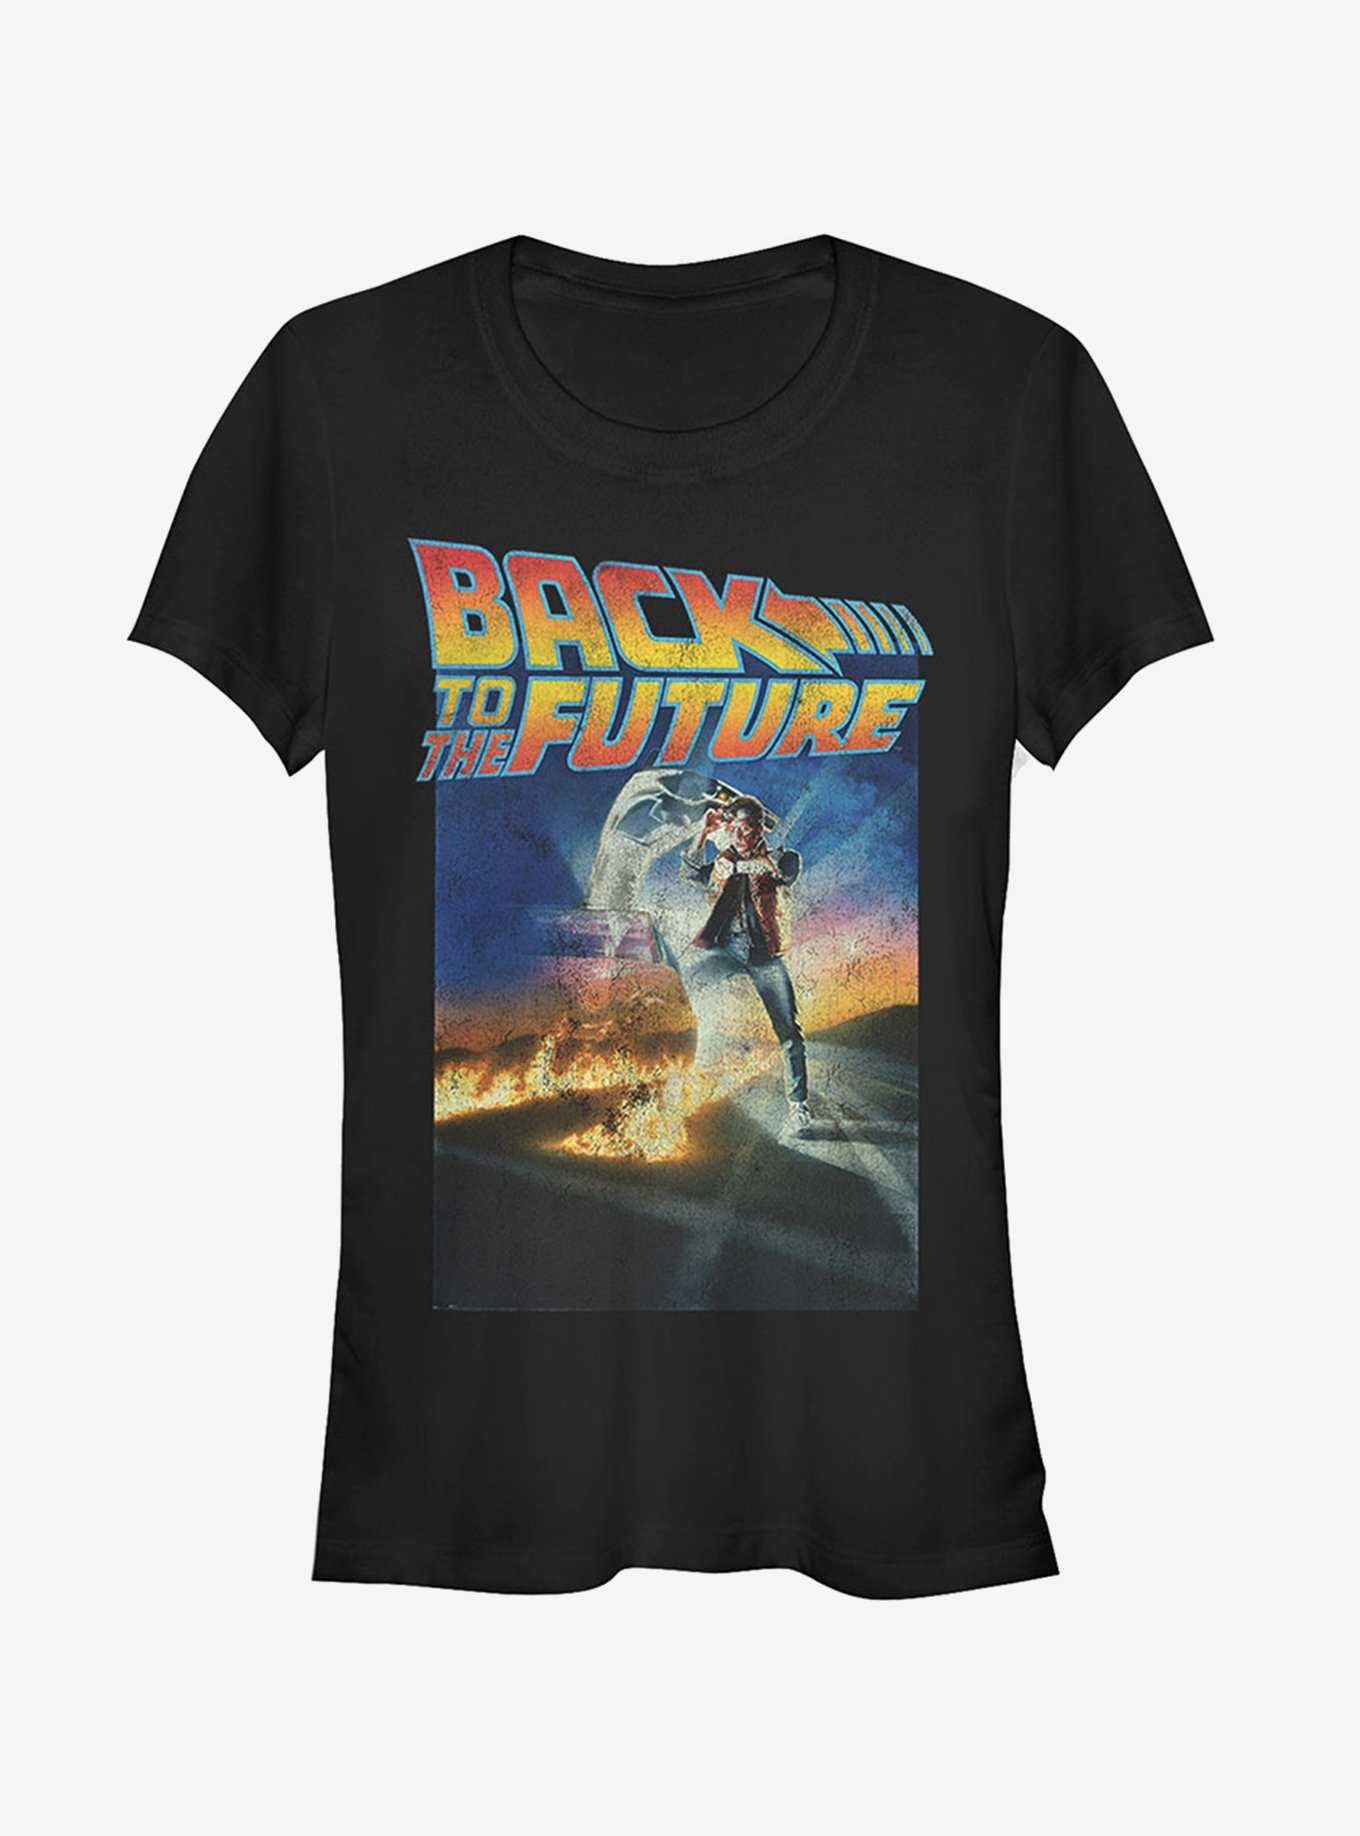 Retro Marty McFly Poster Girls T-Shirt, , hi-res